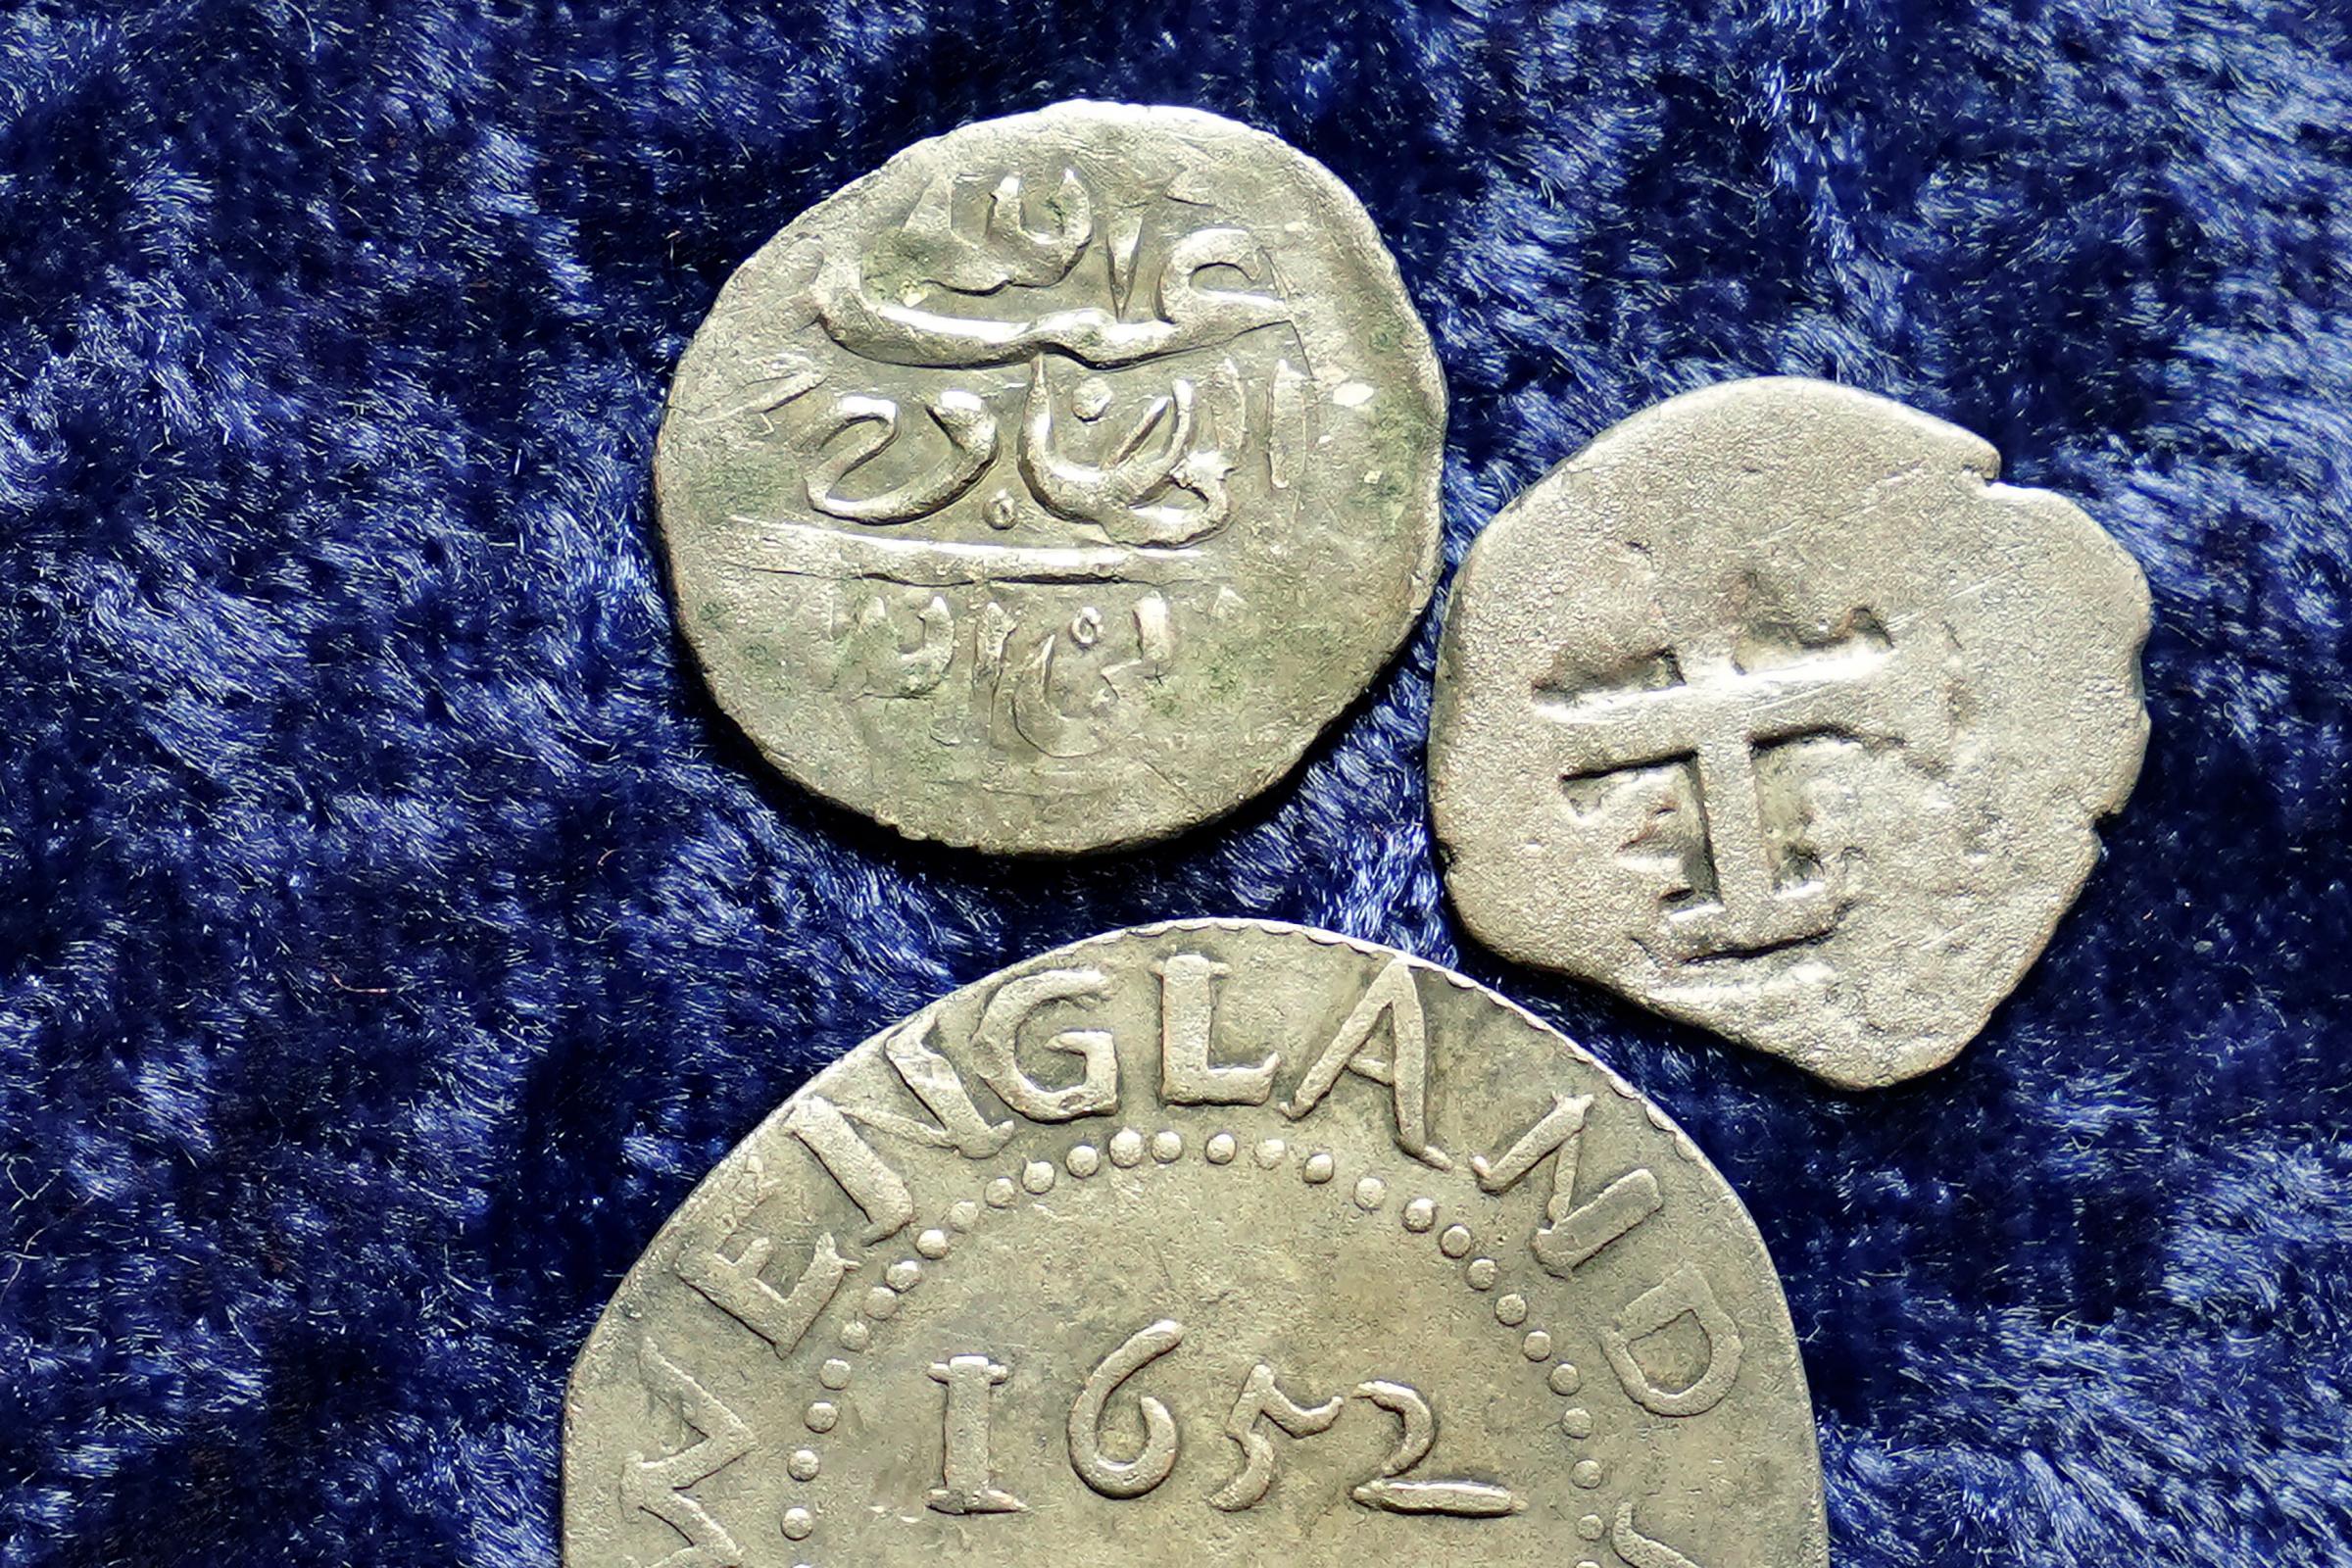 A 17th century Arabian silver coin, top, that research shows was struck in 1693 in Yemen, rests near an Oak Tree Shilling minted in 1652 by the Massachusetts Bay Colony, below, and a Spanish half real coin from 1727, right. The Arabian coin was found at